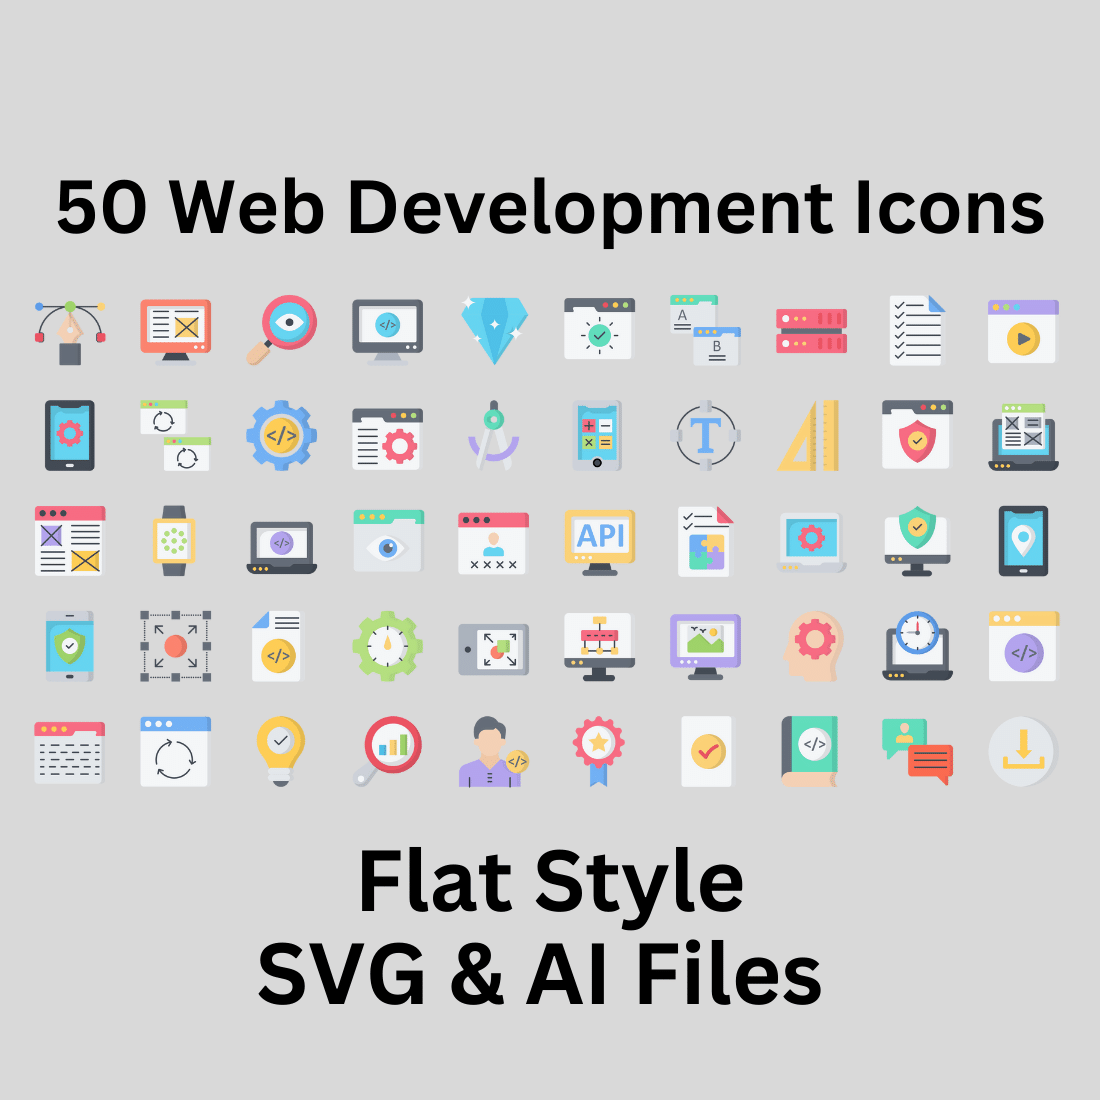 Web Development Icon Set 50 Flat Icons - SVG And AI Files preview image.